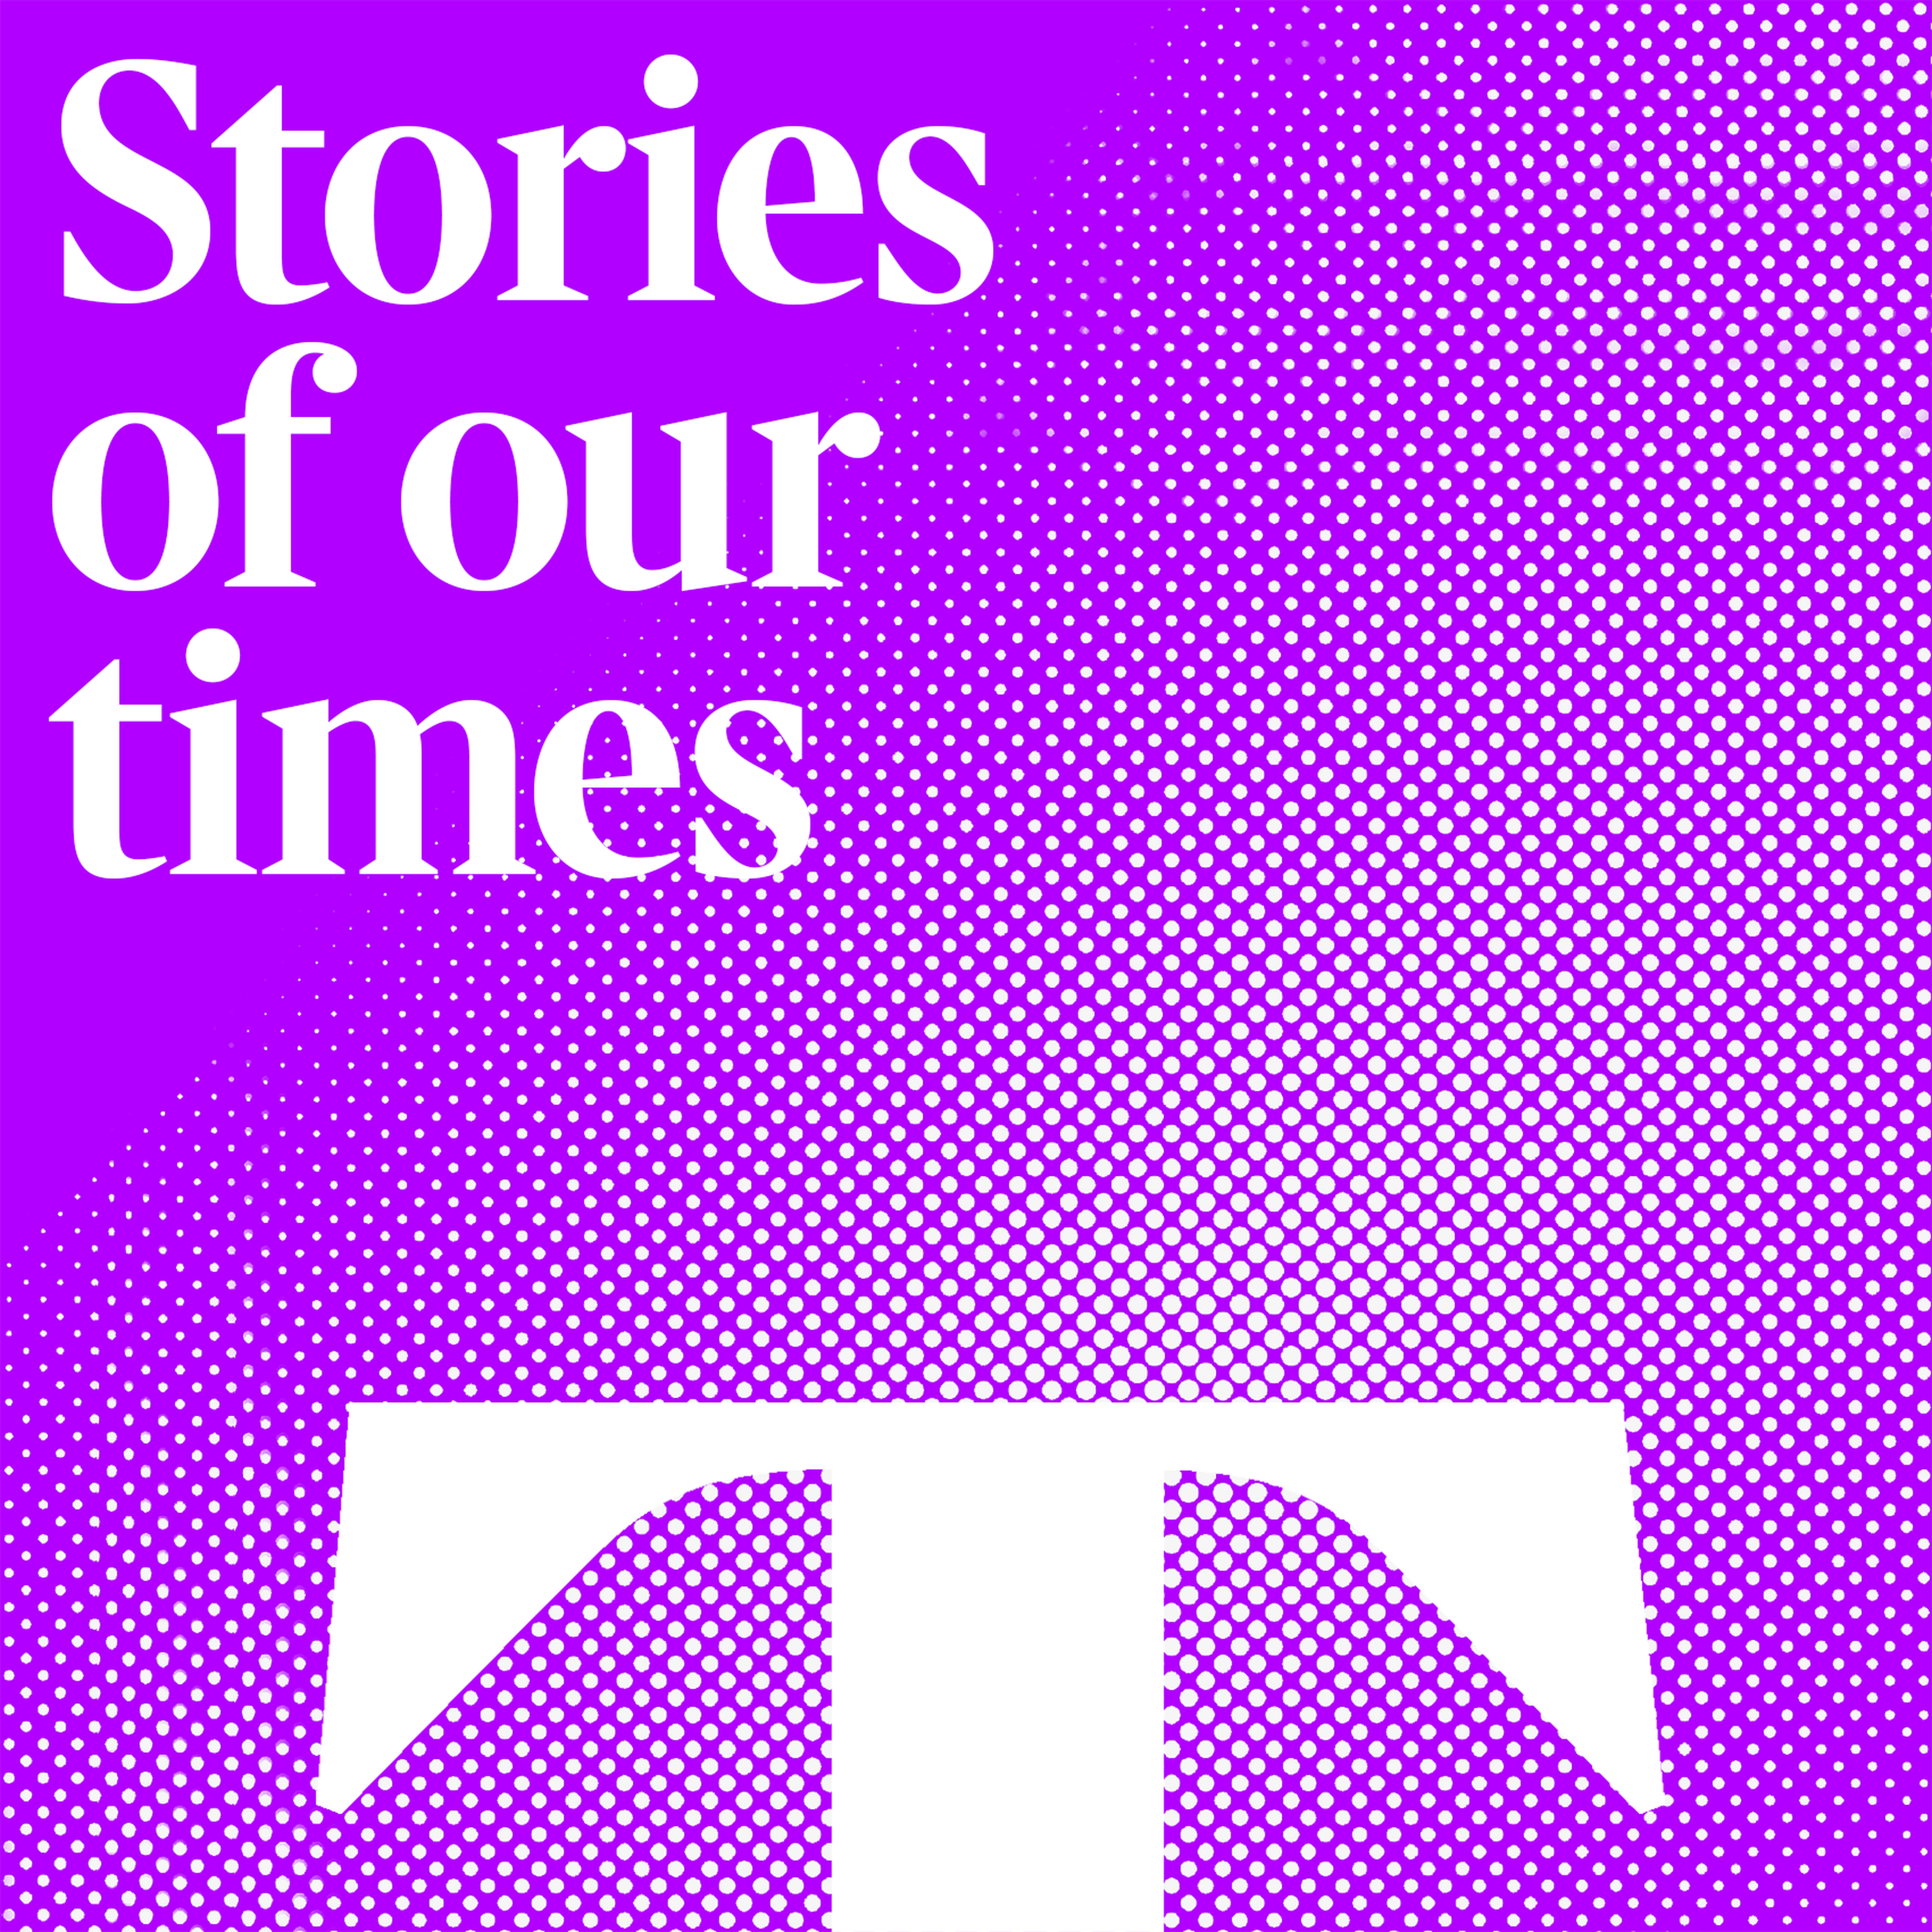 Introducing Stories of our times; Splendid isolation with Jon Ronson